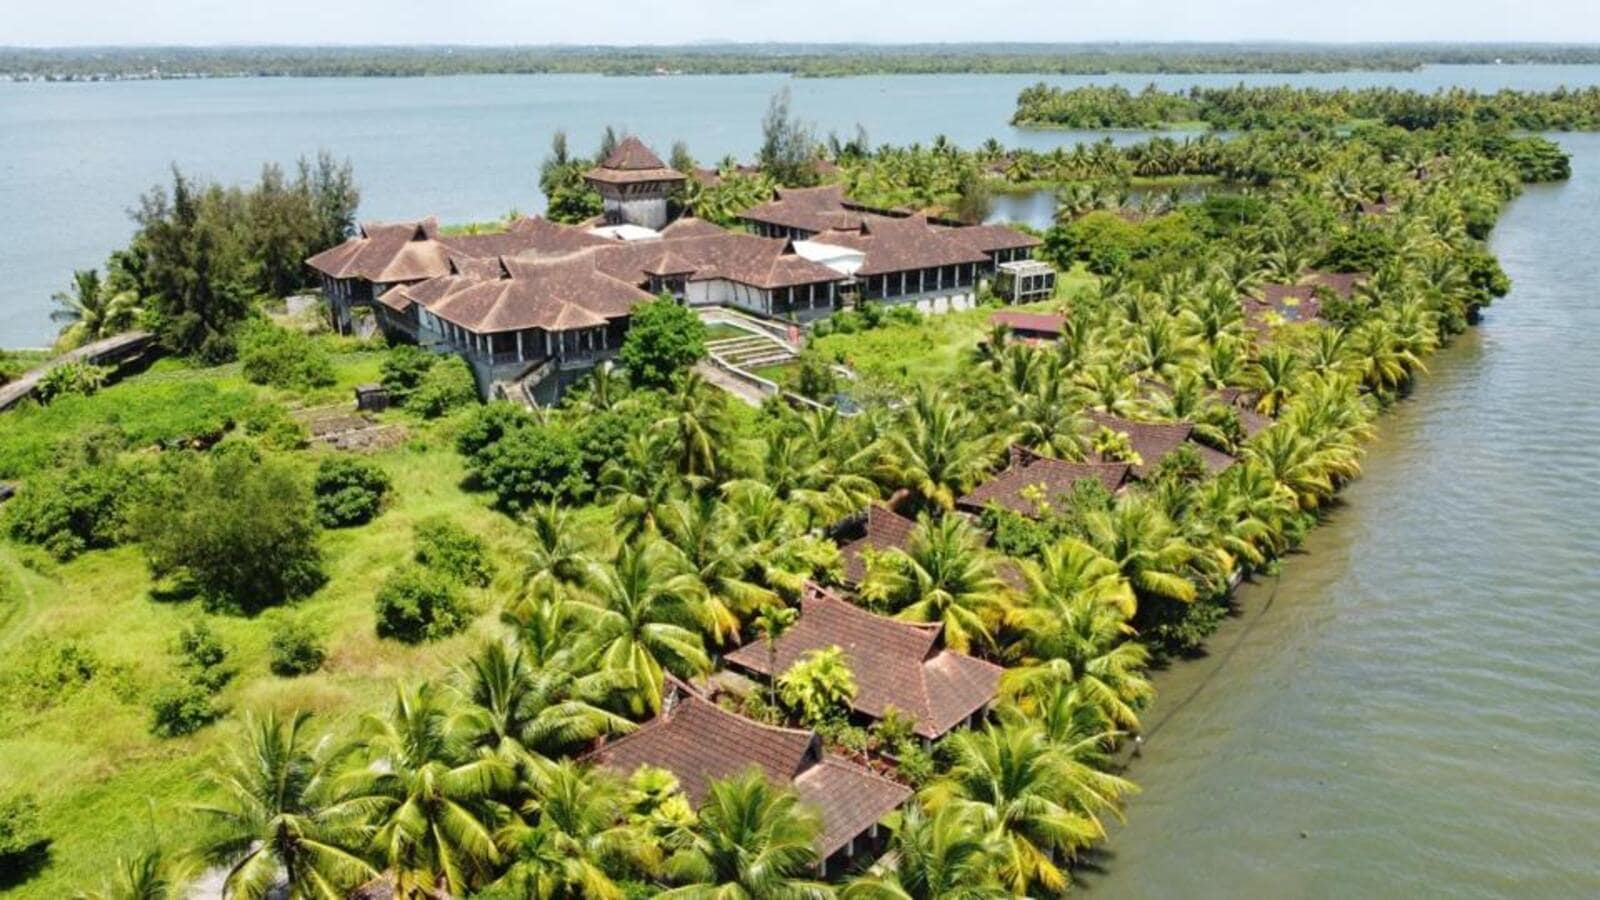 After 14-yr legal battle, demolition of private resort in Kerala begins |  Latest News India - Hindustan Times